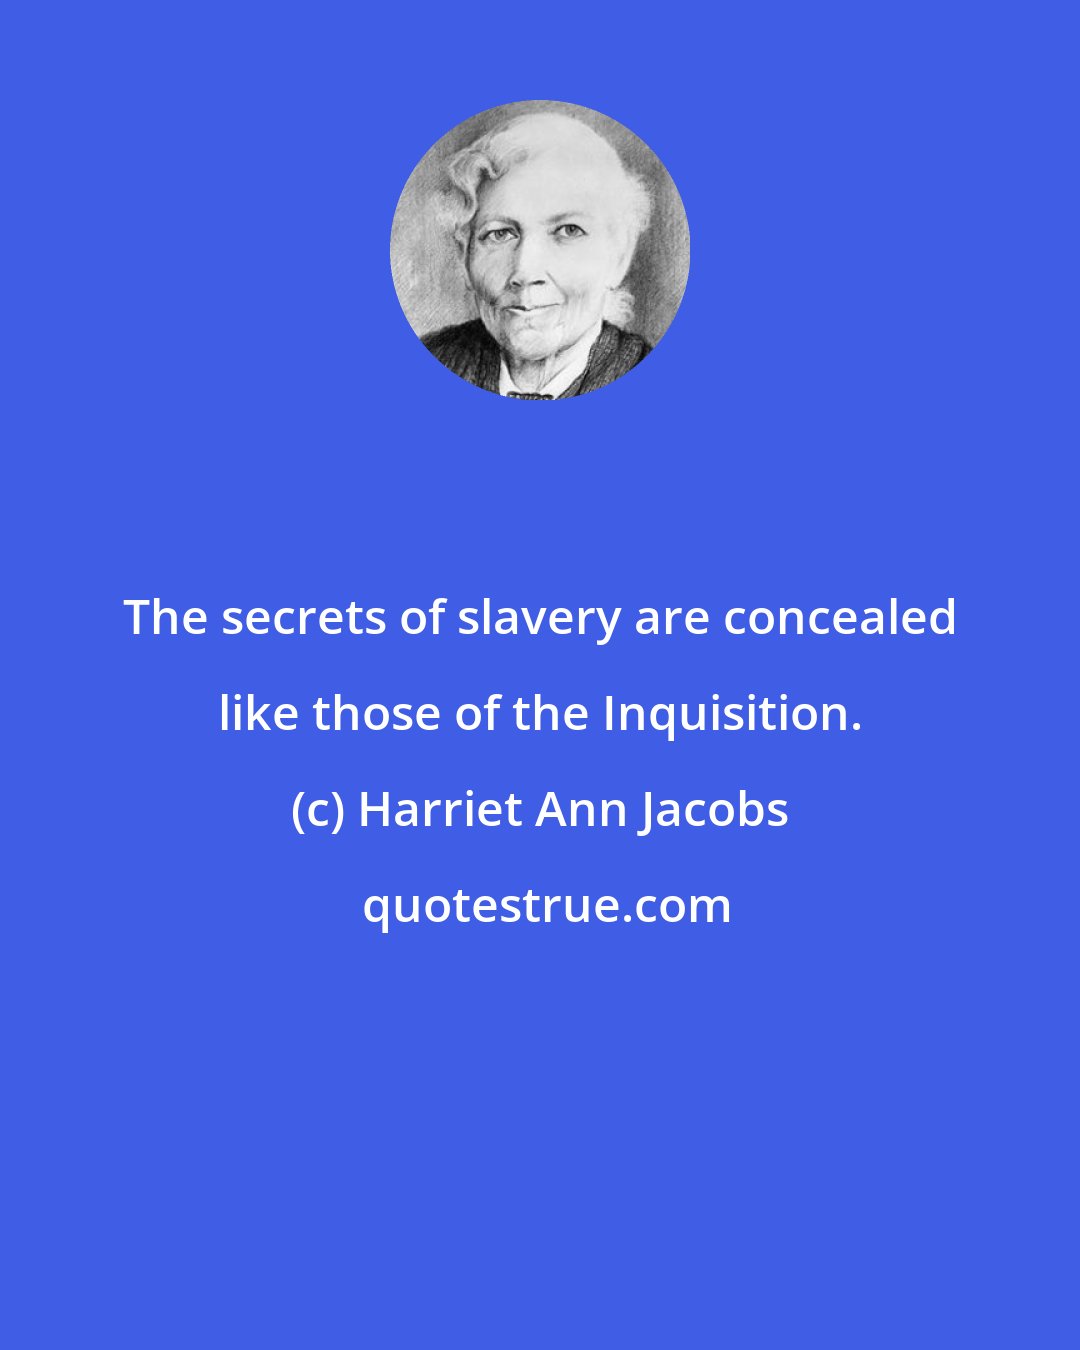 Harriet Ann Jacobs: The secrets of slavery are concealed like those of the Inquisition.